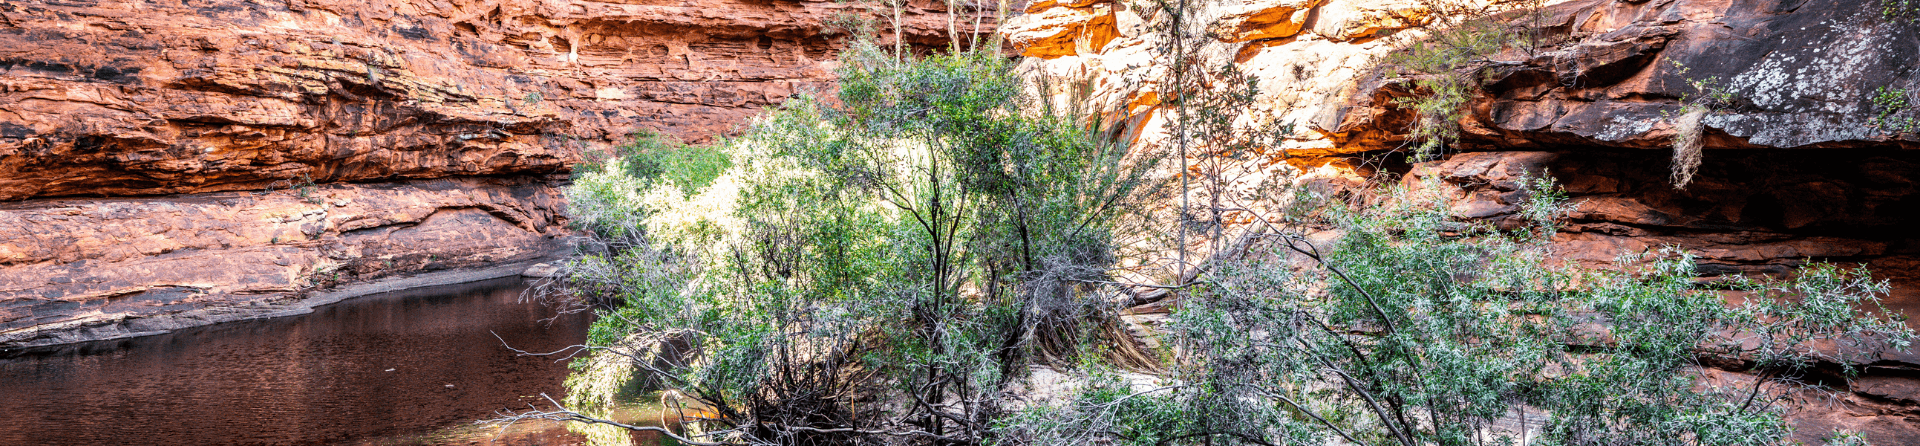 Is it worth visiting the Garden of Eden in Kings Canyon?